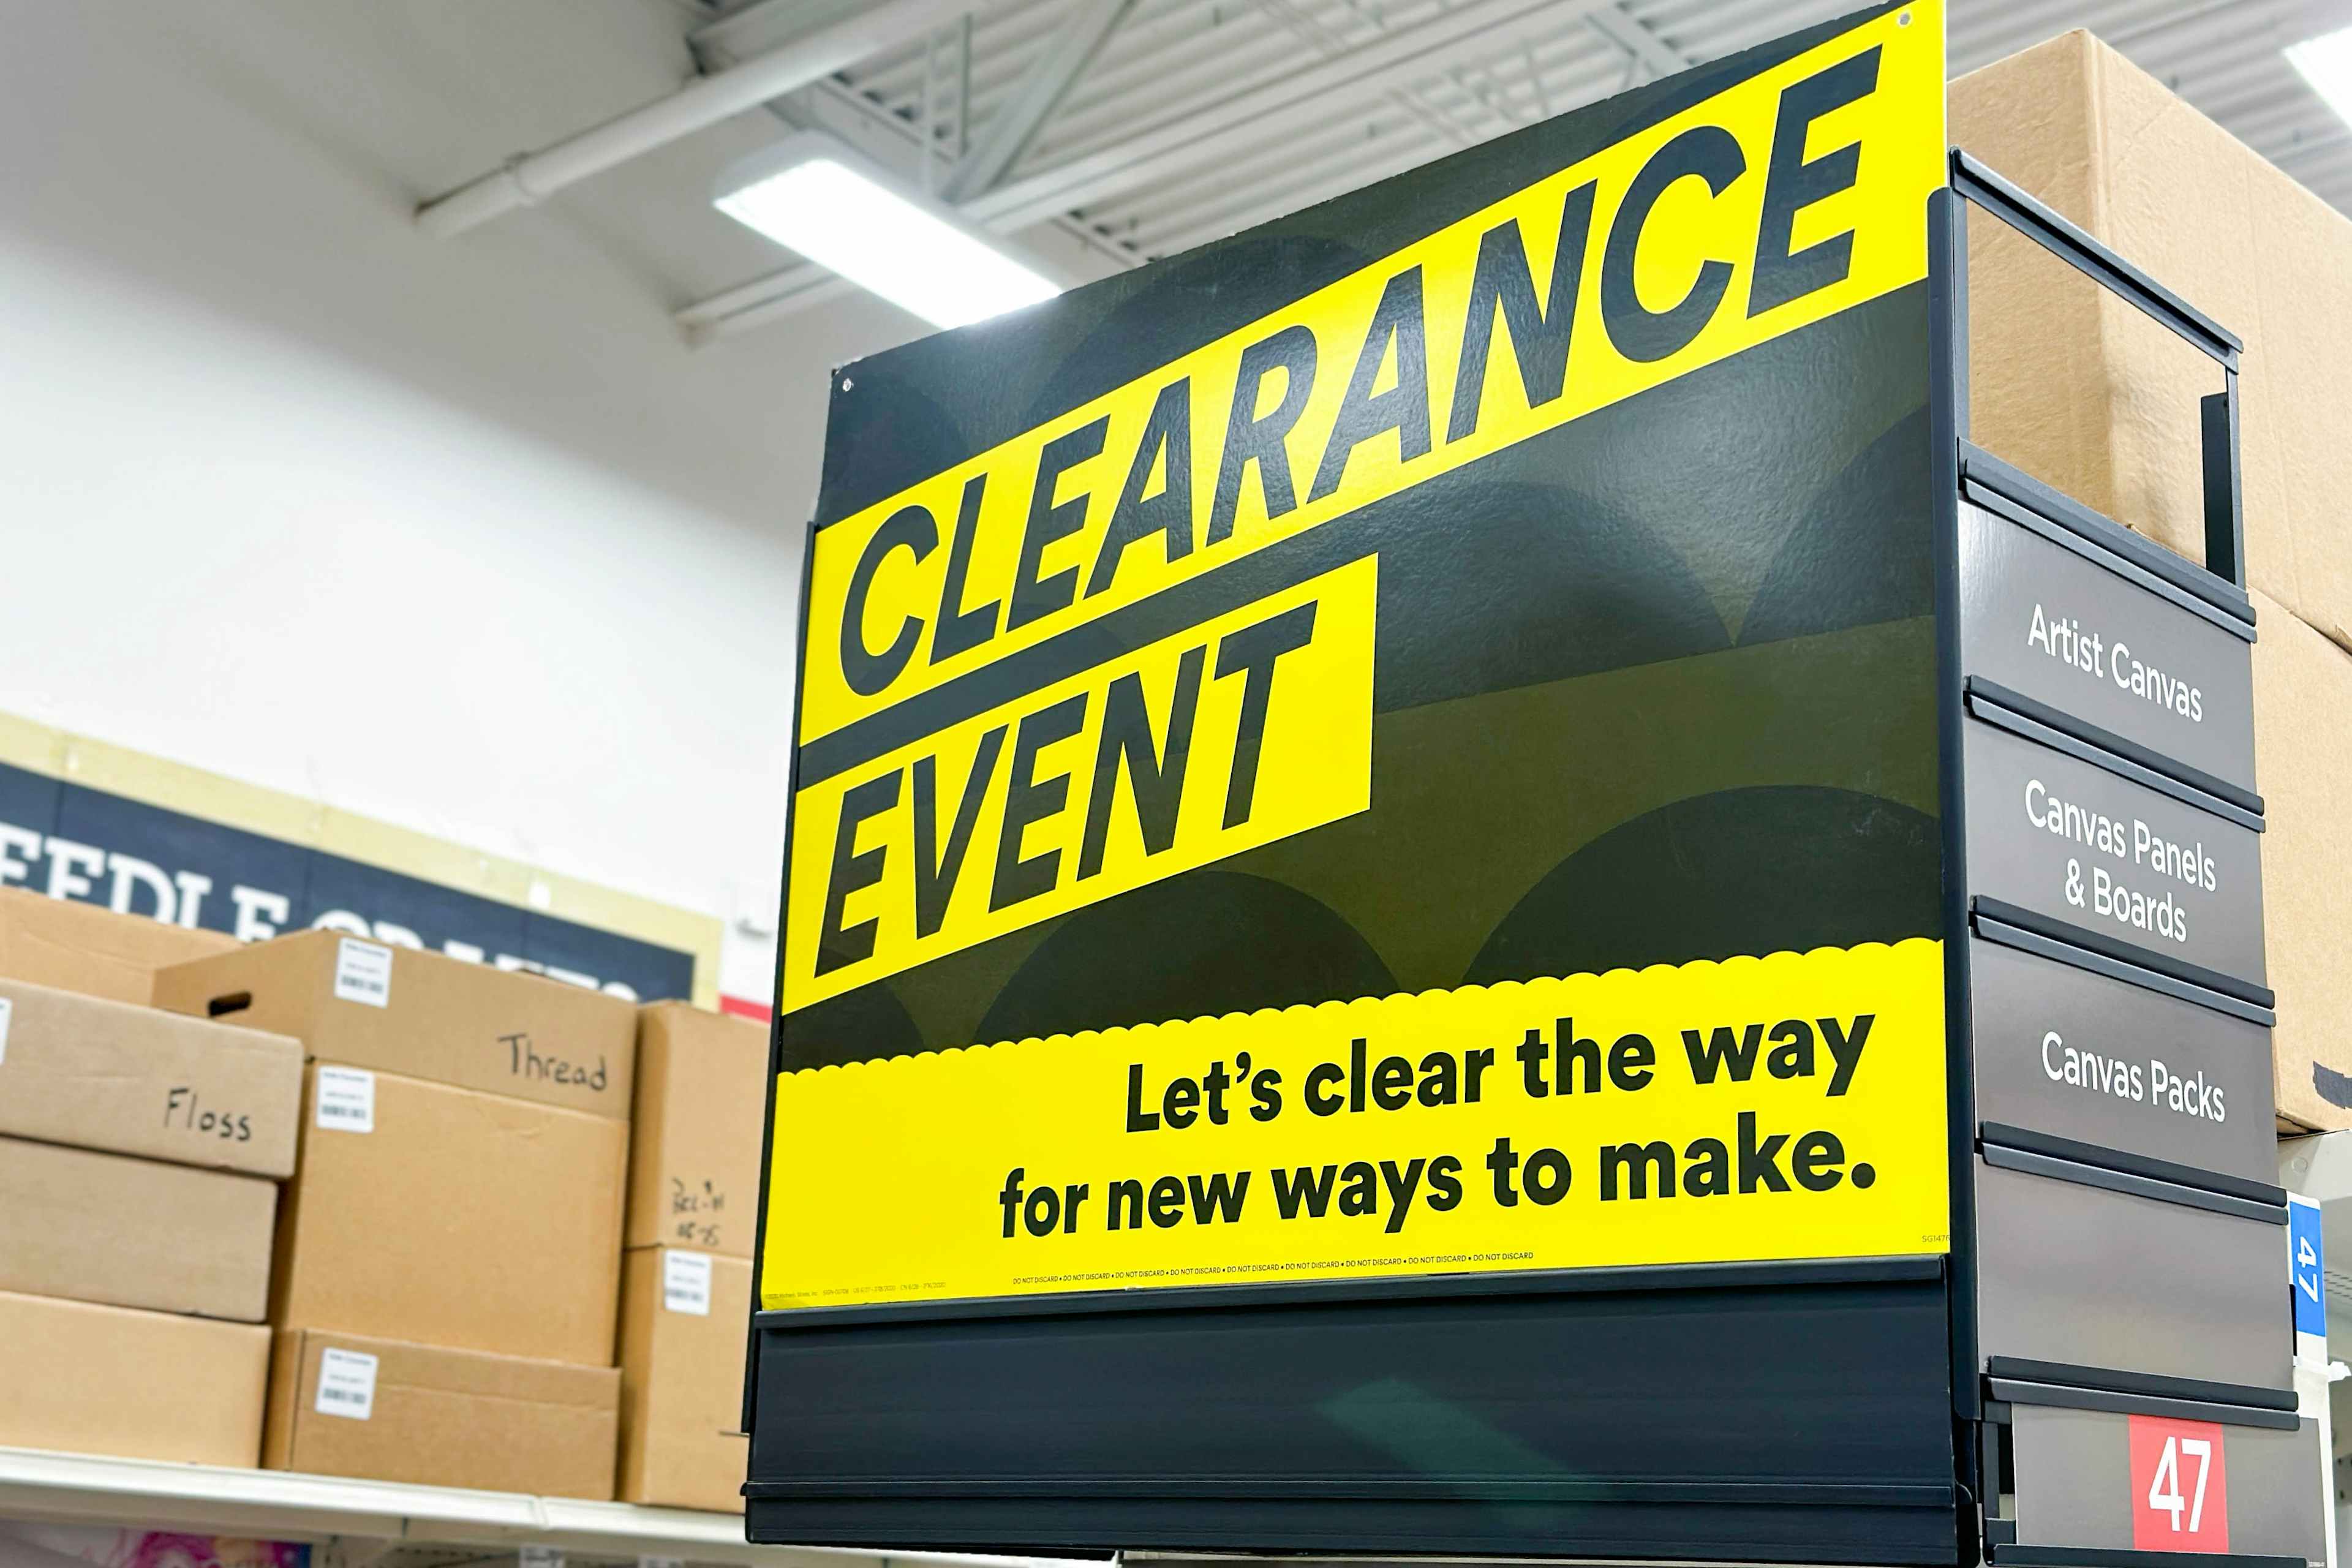 michaels-craft-store-kcl-clearance-event-1